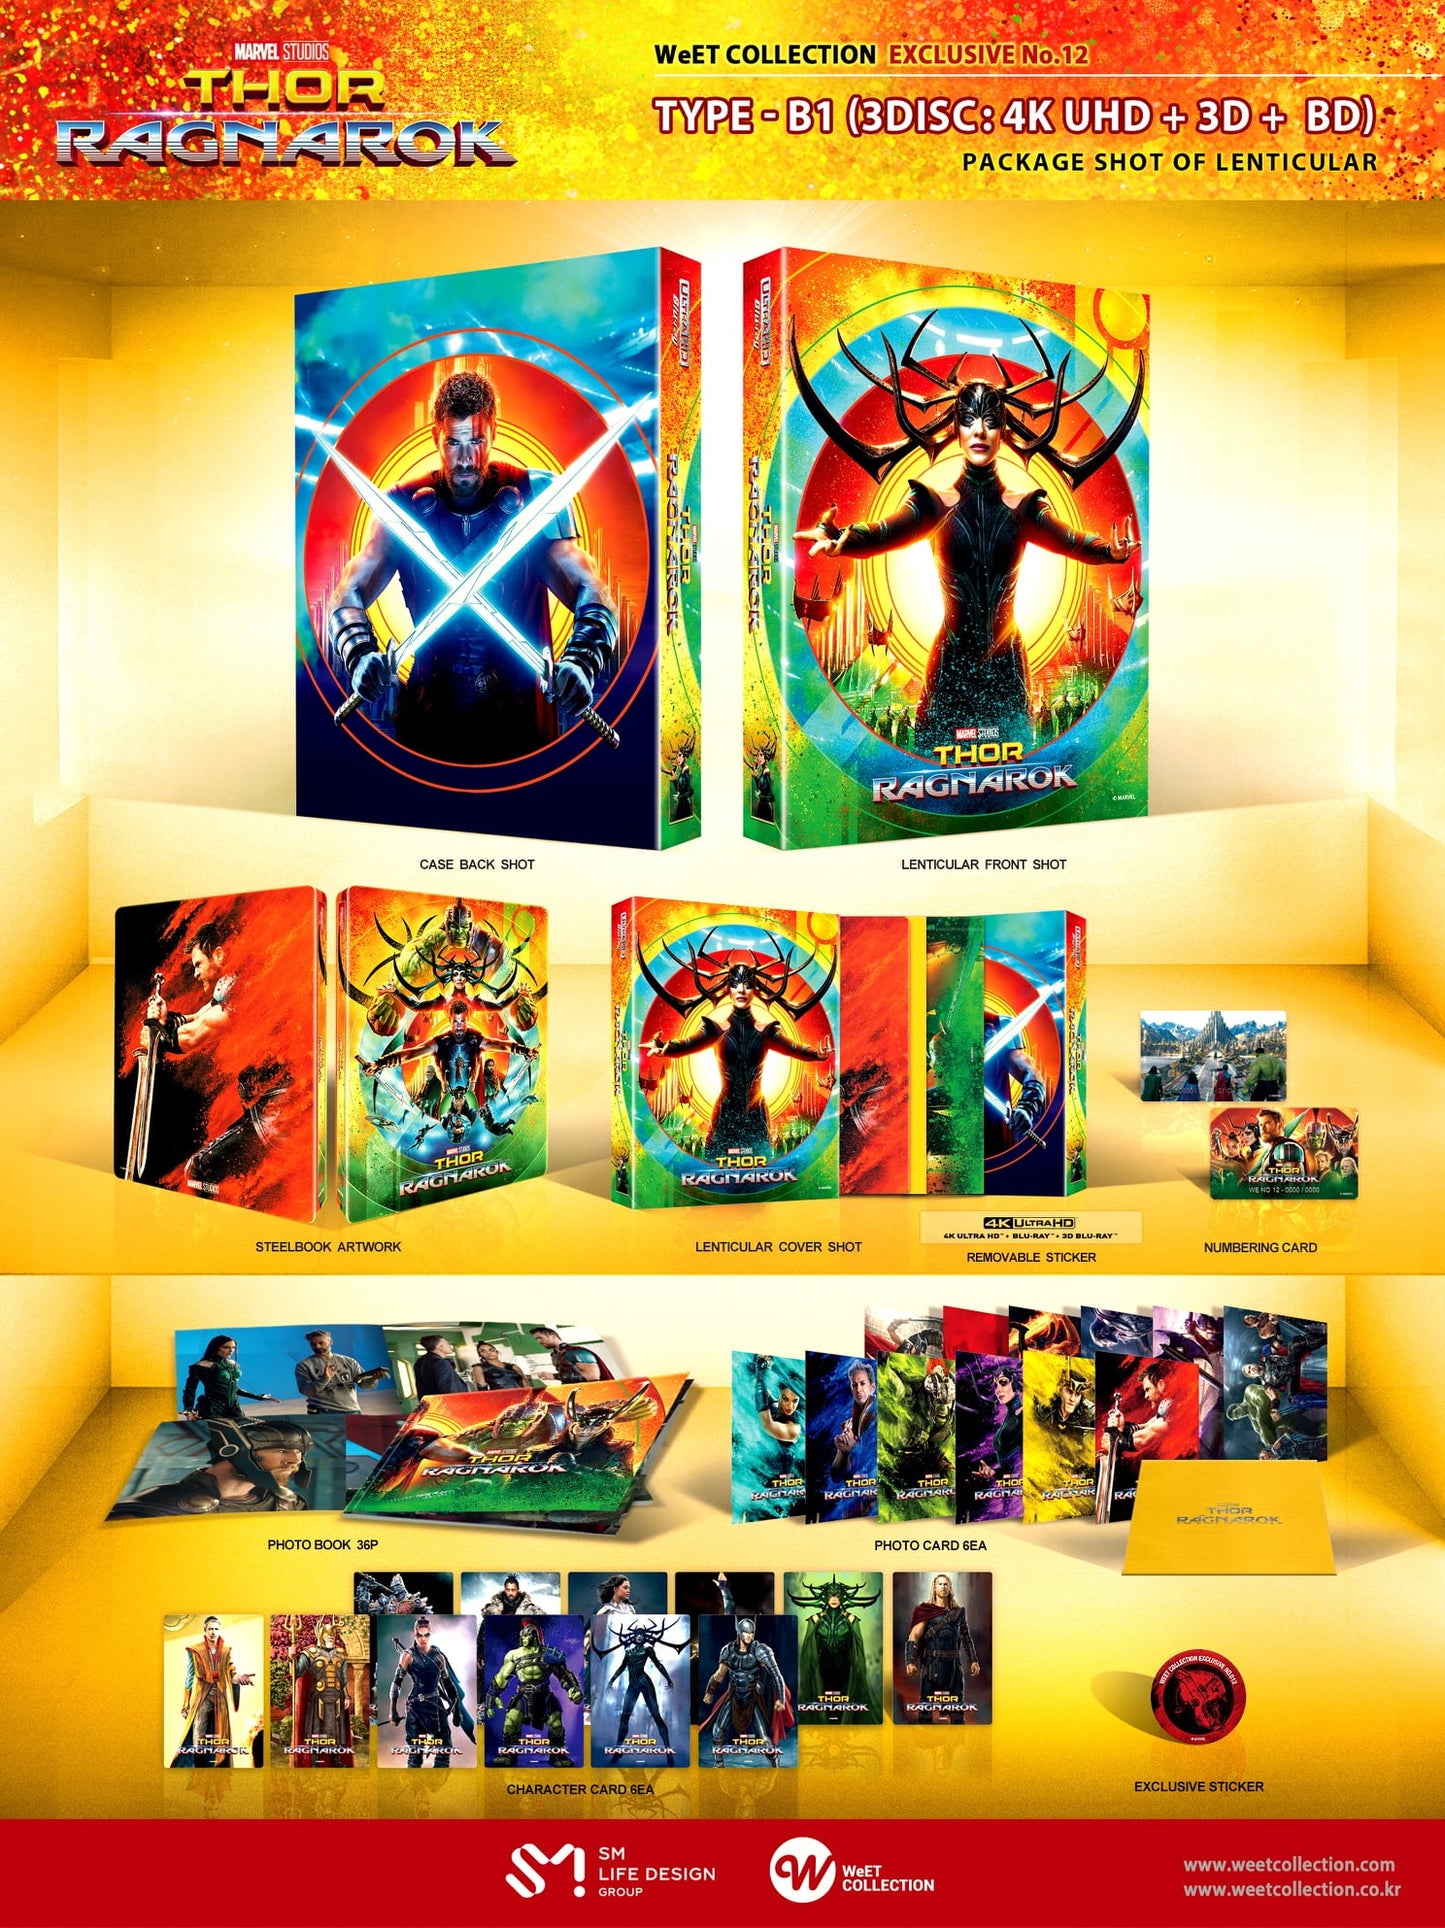 Thor Ragnarok (4K+3D+2D Blu-ray SteelBook) (WeET Collection Exclusive No.12) One Click Box Set